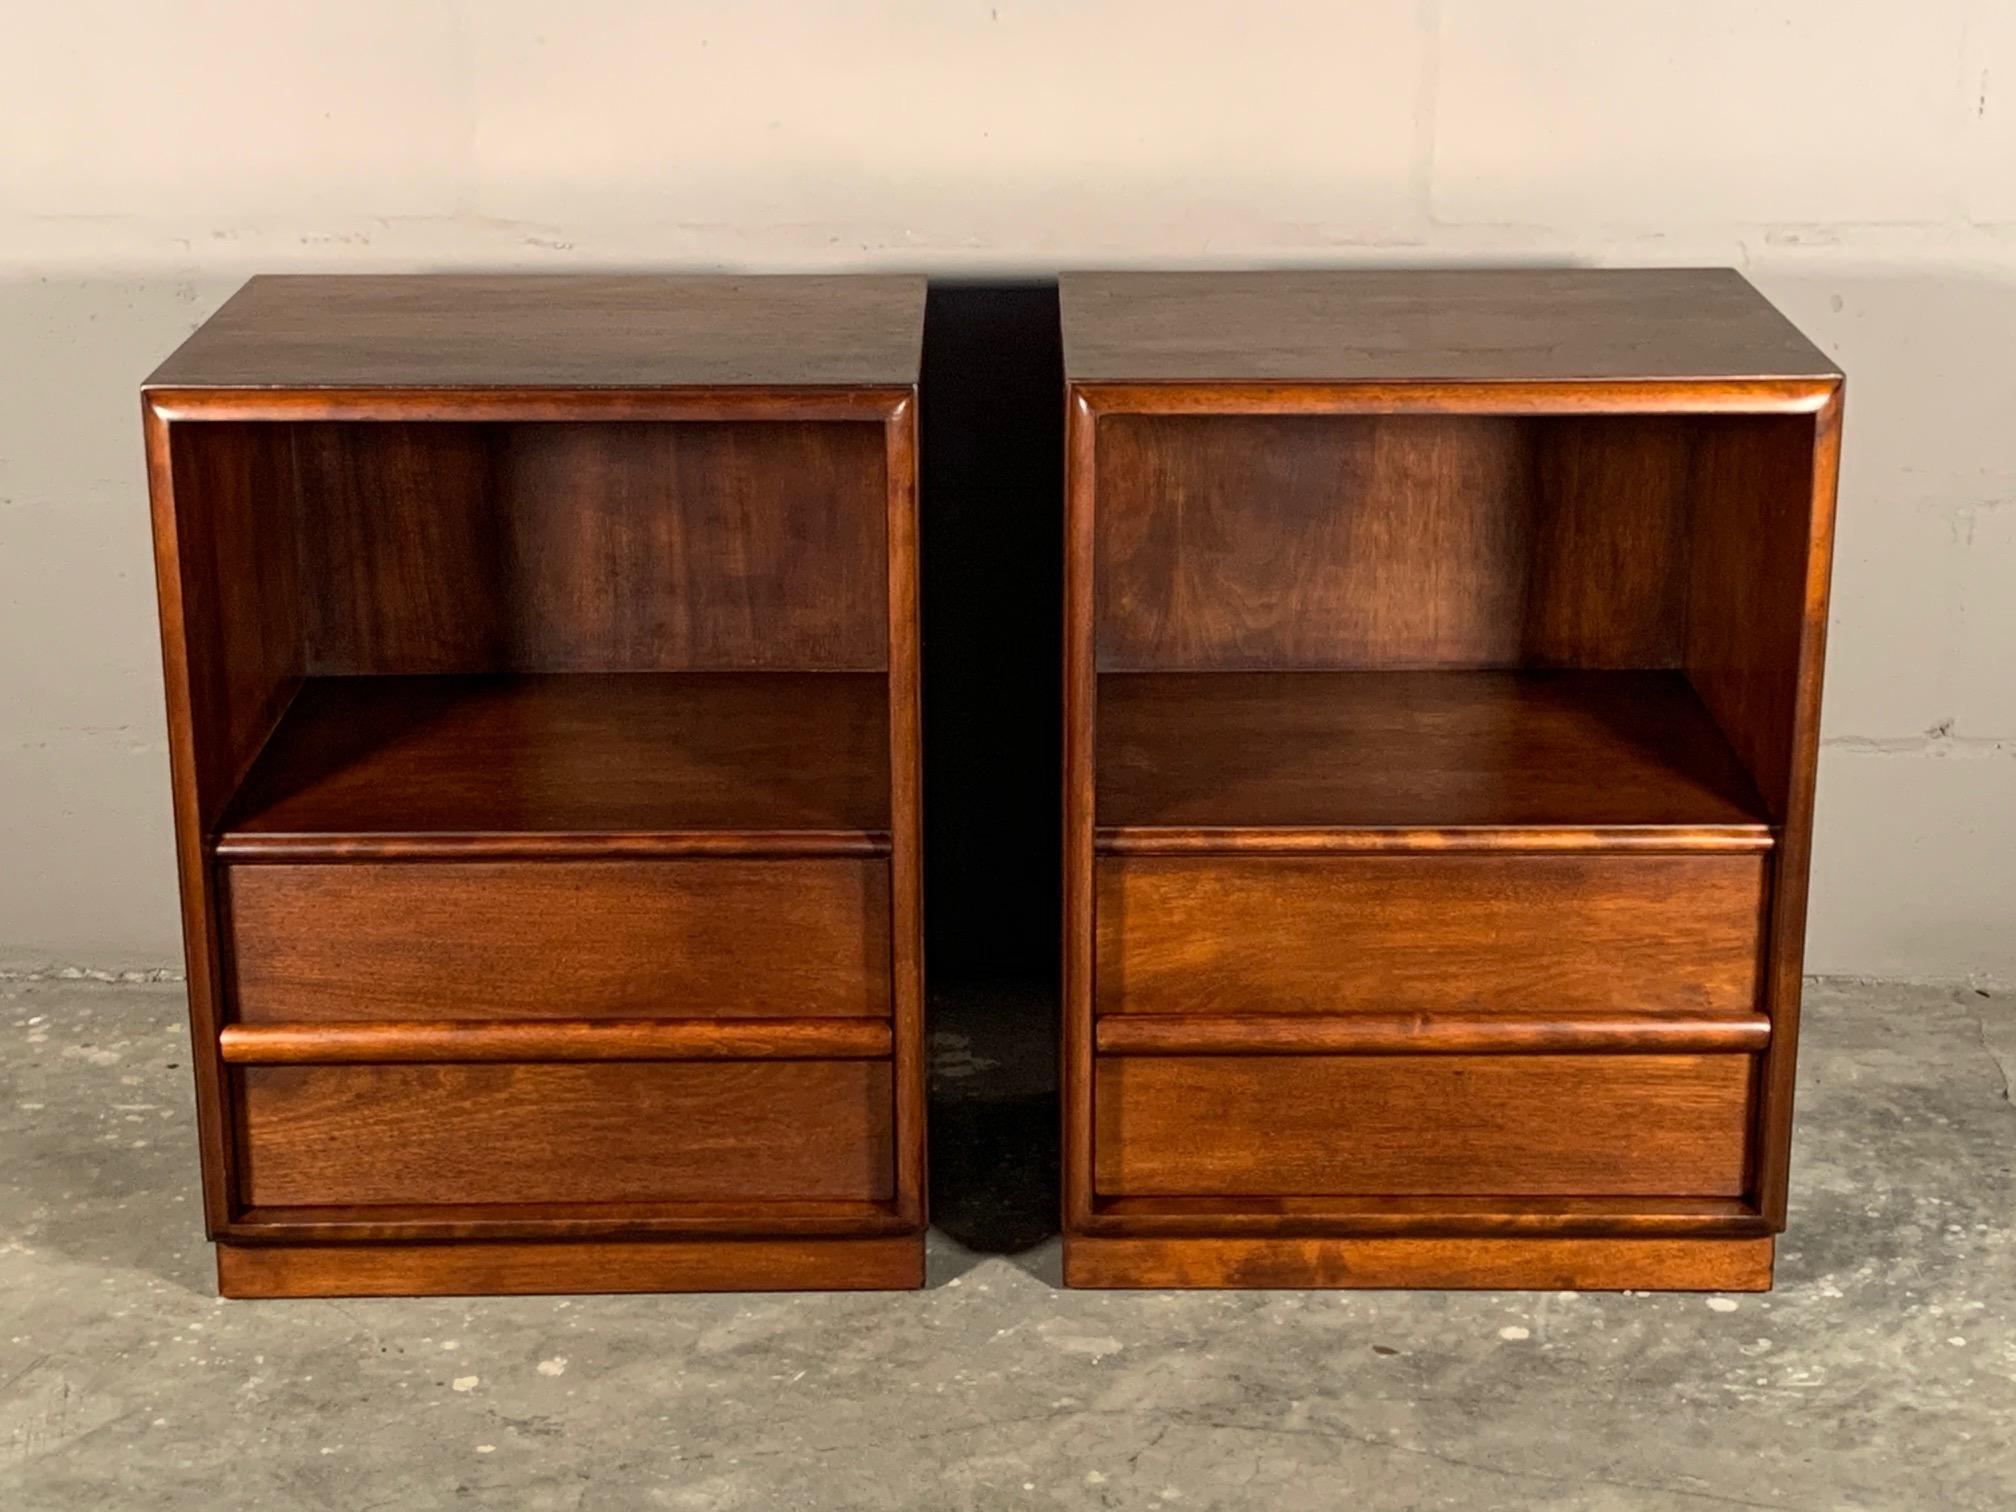 A pair of Classic boxlike nightstands by T.H. Robsjohn-Gibbings for Widdicomb, circa 1950s. Restored in an old fashioned way-custom hand rubbed finish, allowing the patina to come through clearly and beautifully.